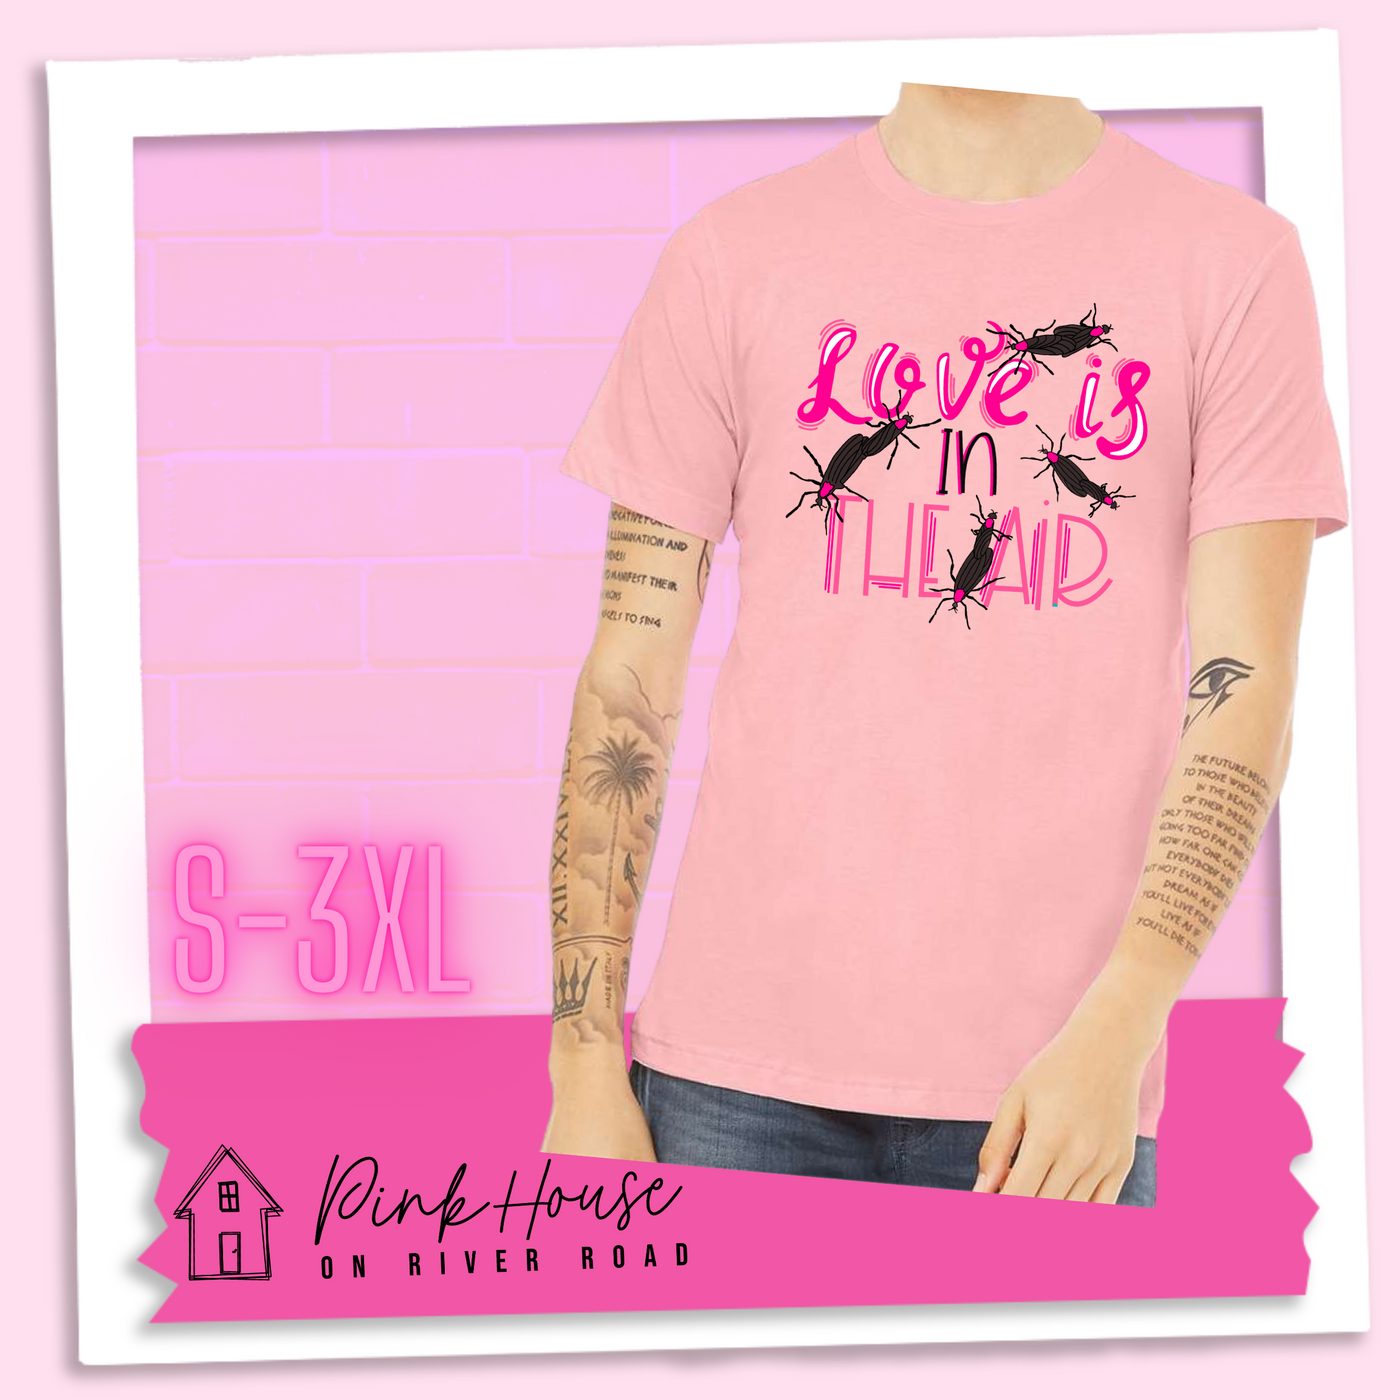 Pink Tee with Graphic. Graphic says " Love Is in the Air". "Love Is" is a hot pink cursive font with white highlights and hot pink accent lines underneath is the word "In" Is it in a black font with a hot pink highlight. on the bottom is "The Air" in Light pink with light pink accent lines. There are also black flying bugs with hot pink spots behind their heads